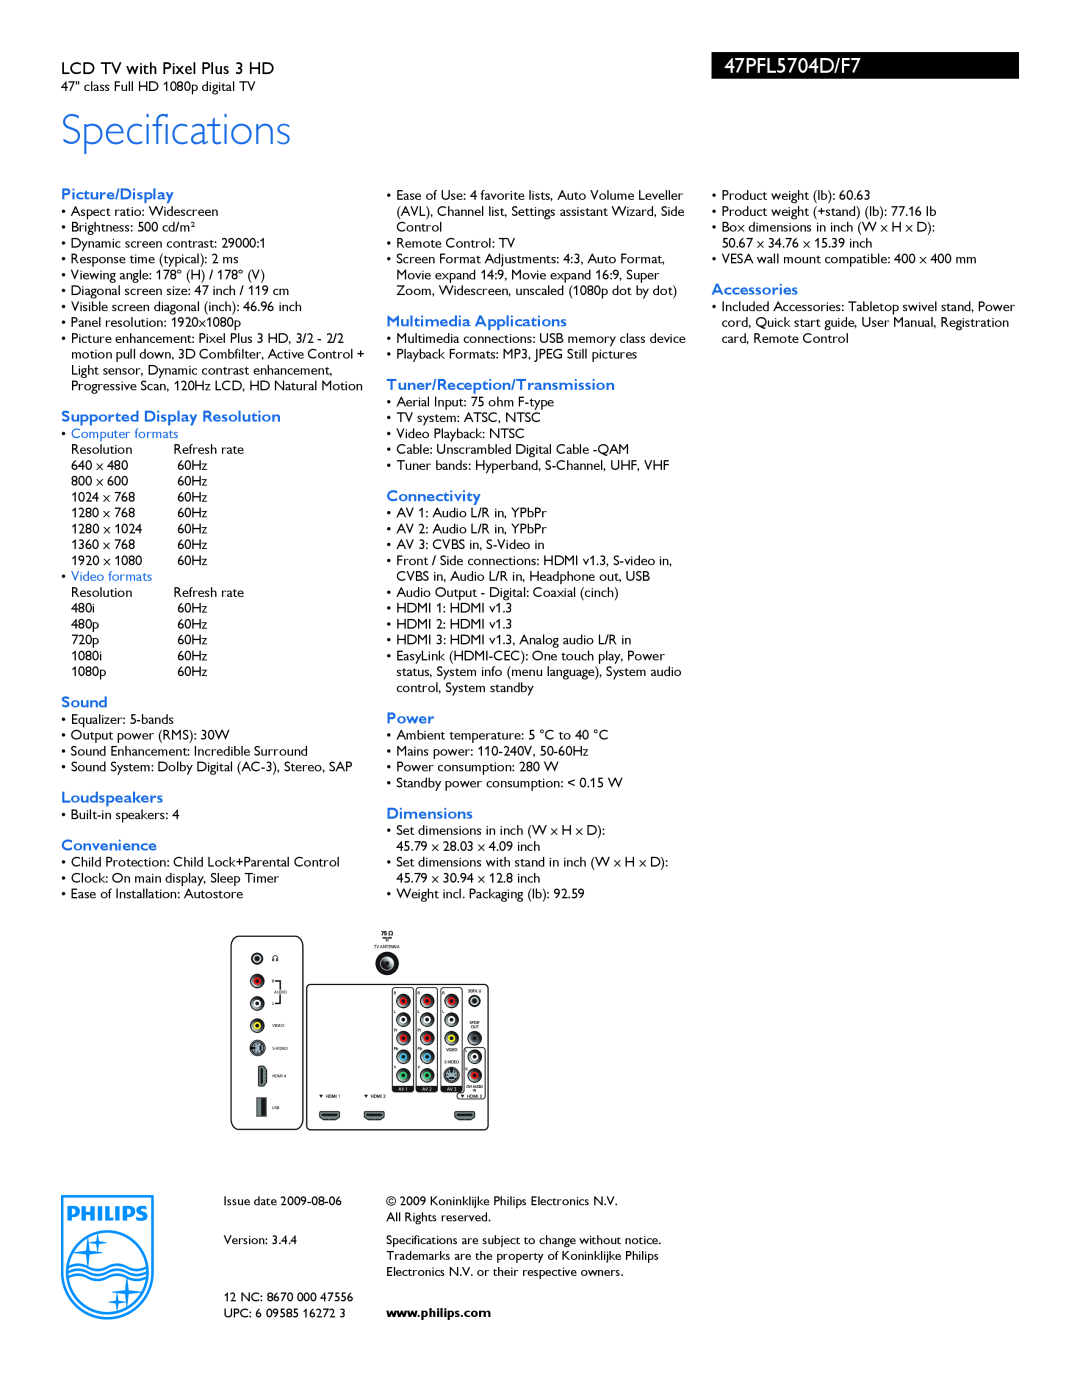 Philips manual Specifications, 47PFL5704D/F7, Picture/Display, Accessories, Multimedia Applications, Connectivity, Sound 